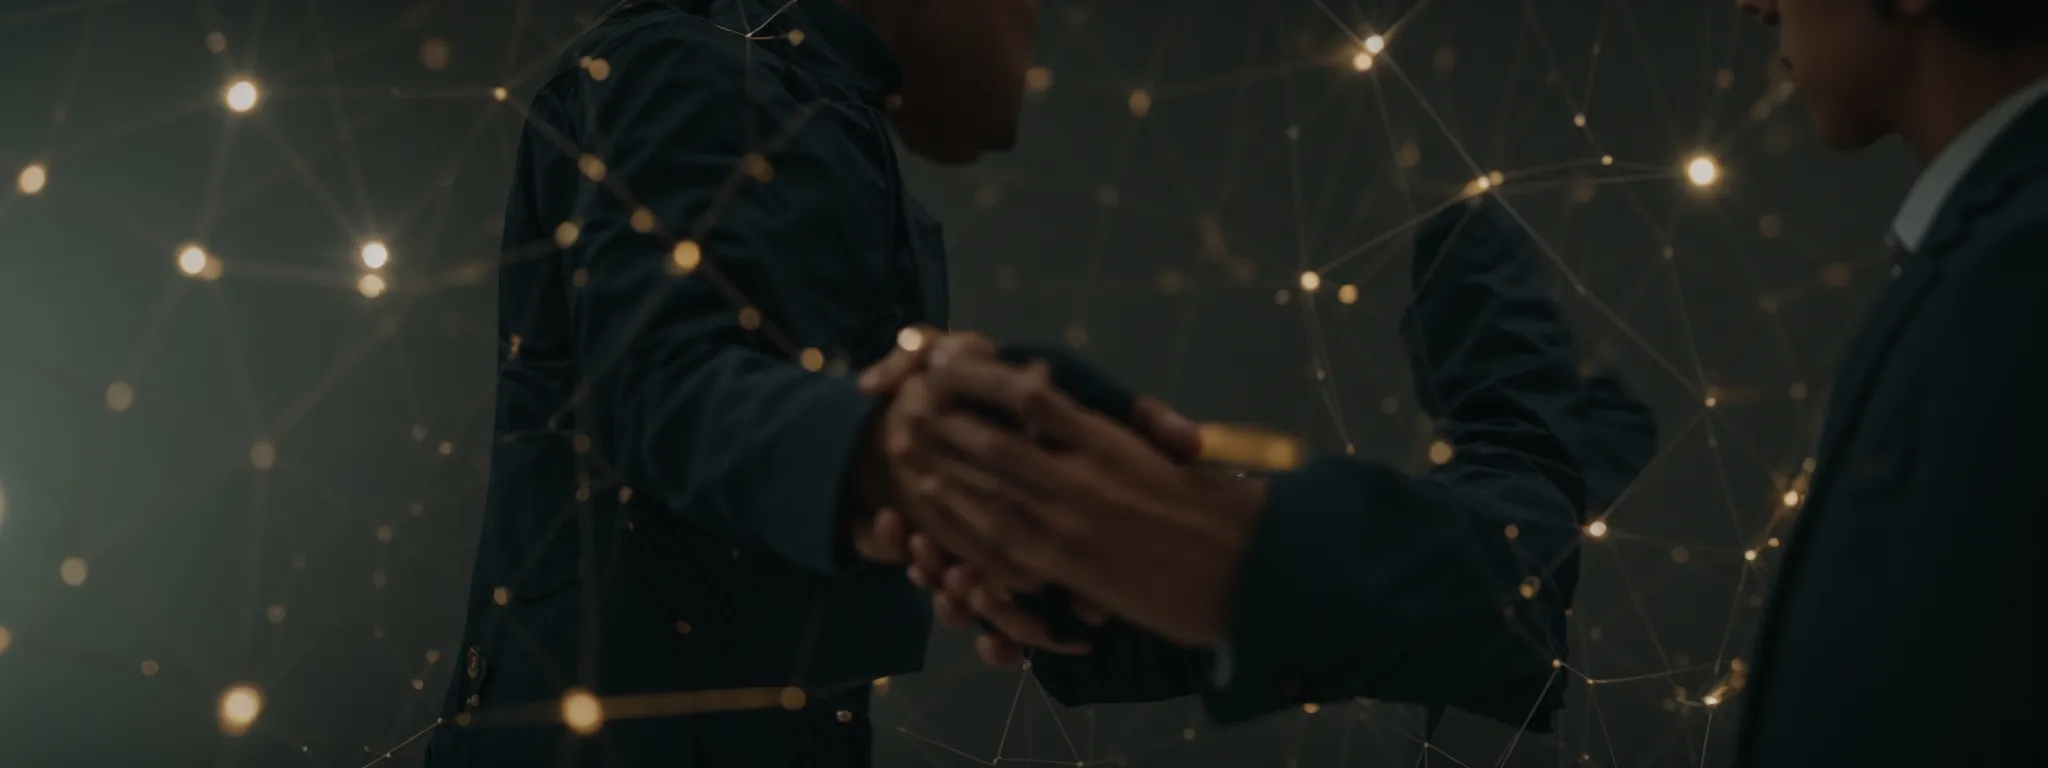 a person confidently shaking hands with a professional partner against a backdrop of a network of interconnected nodes.